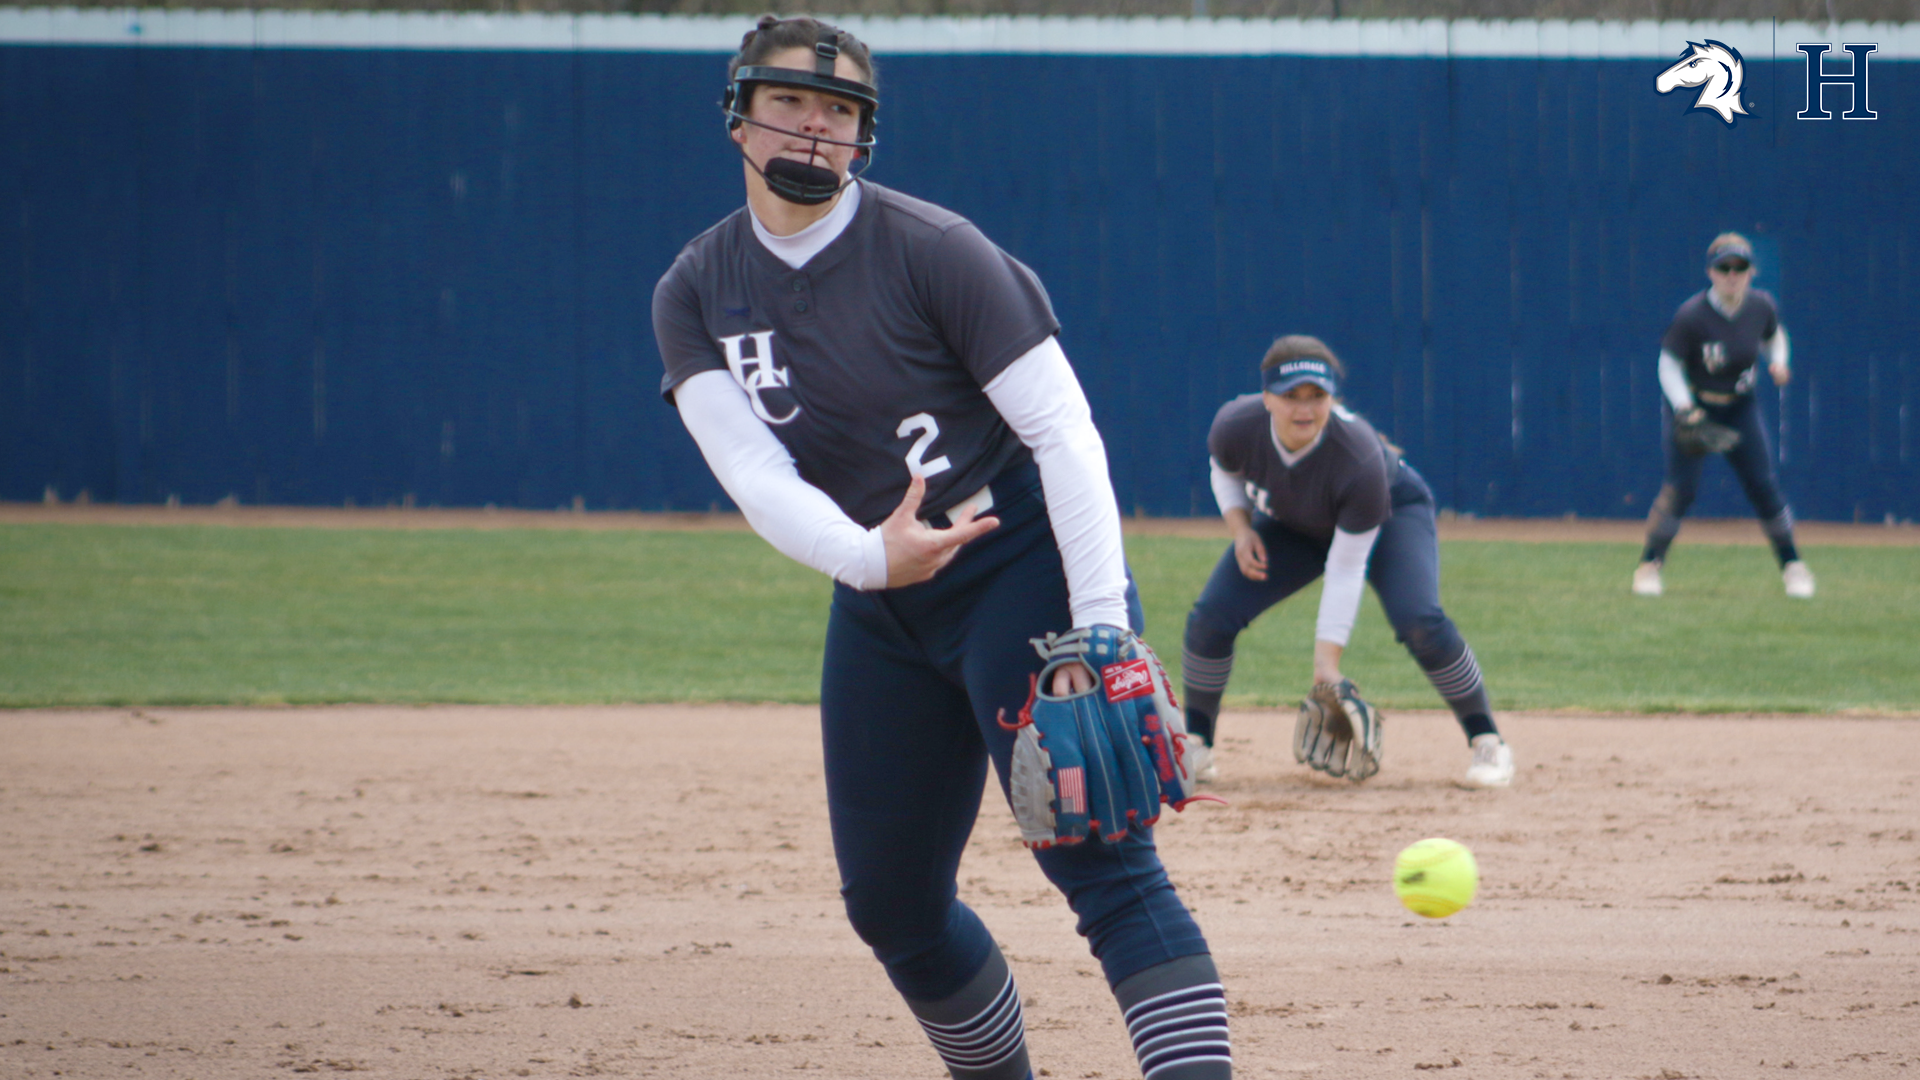 Chargers' Joni Russell earns second G-MAC Softball Pitcher of the Week Honor (April 25-May 2)